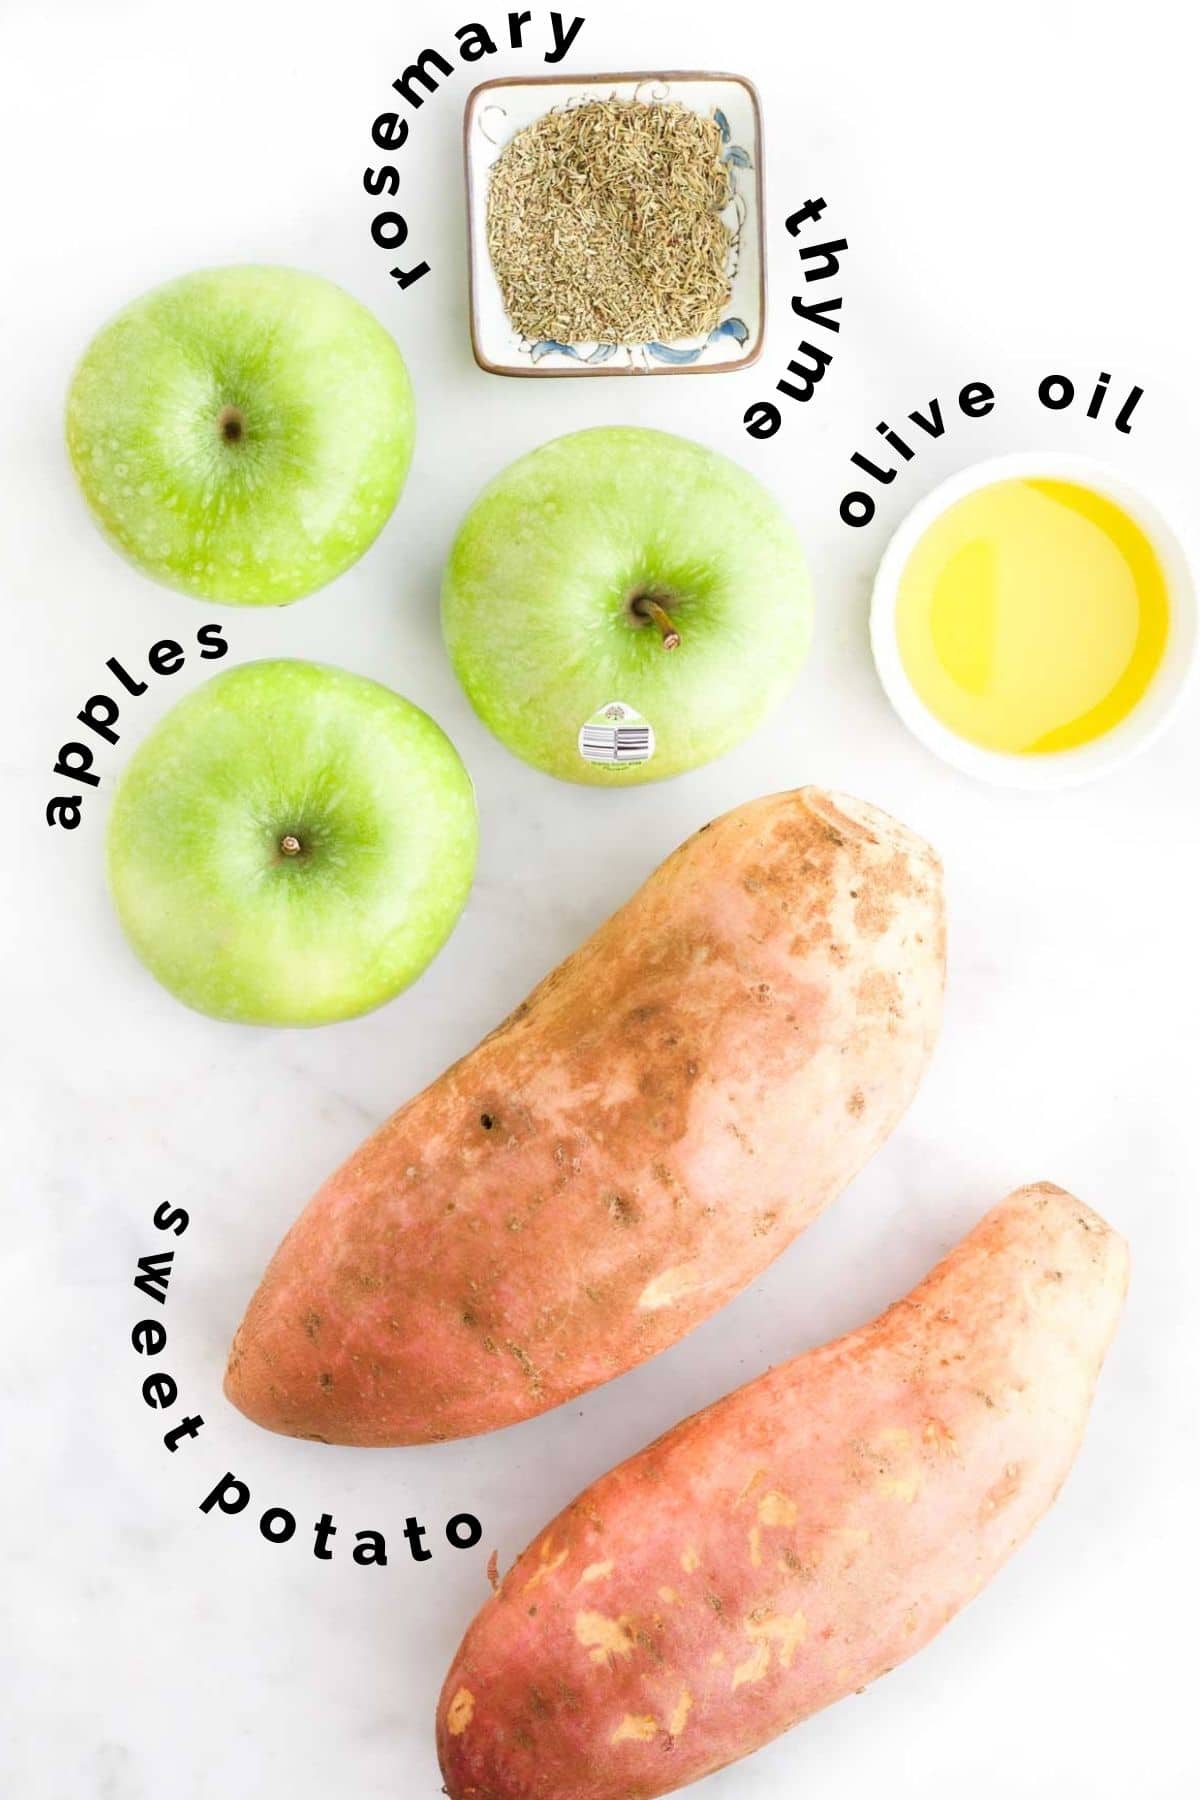 Flat Lay of Ingredients Needed to Make Roasted Sweet Potato and Apple